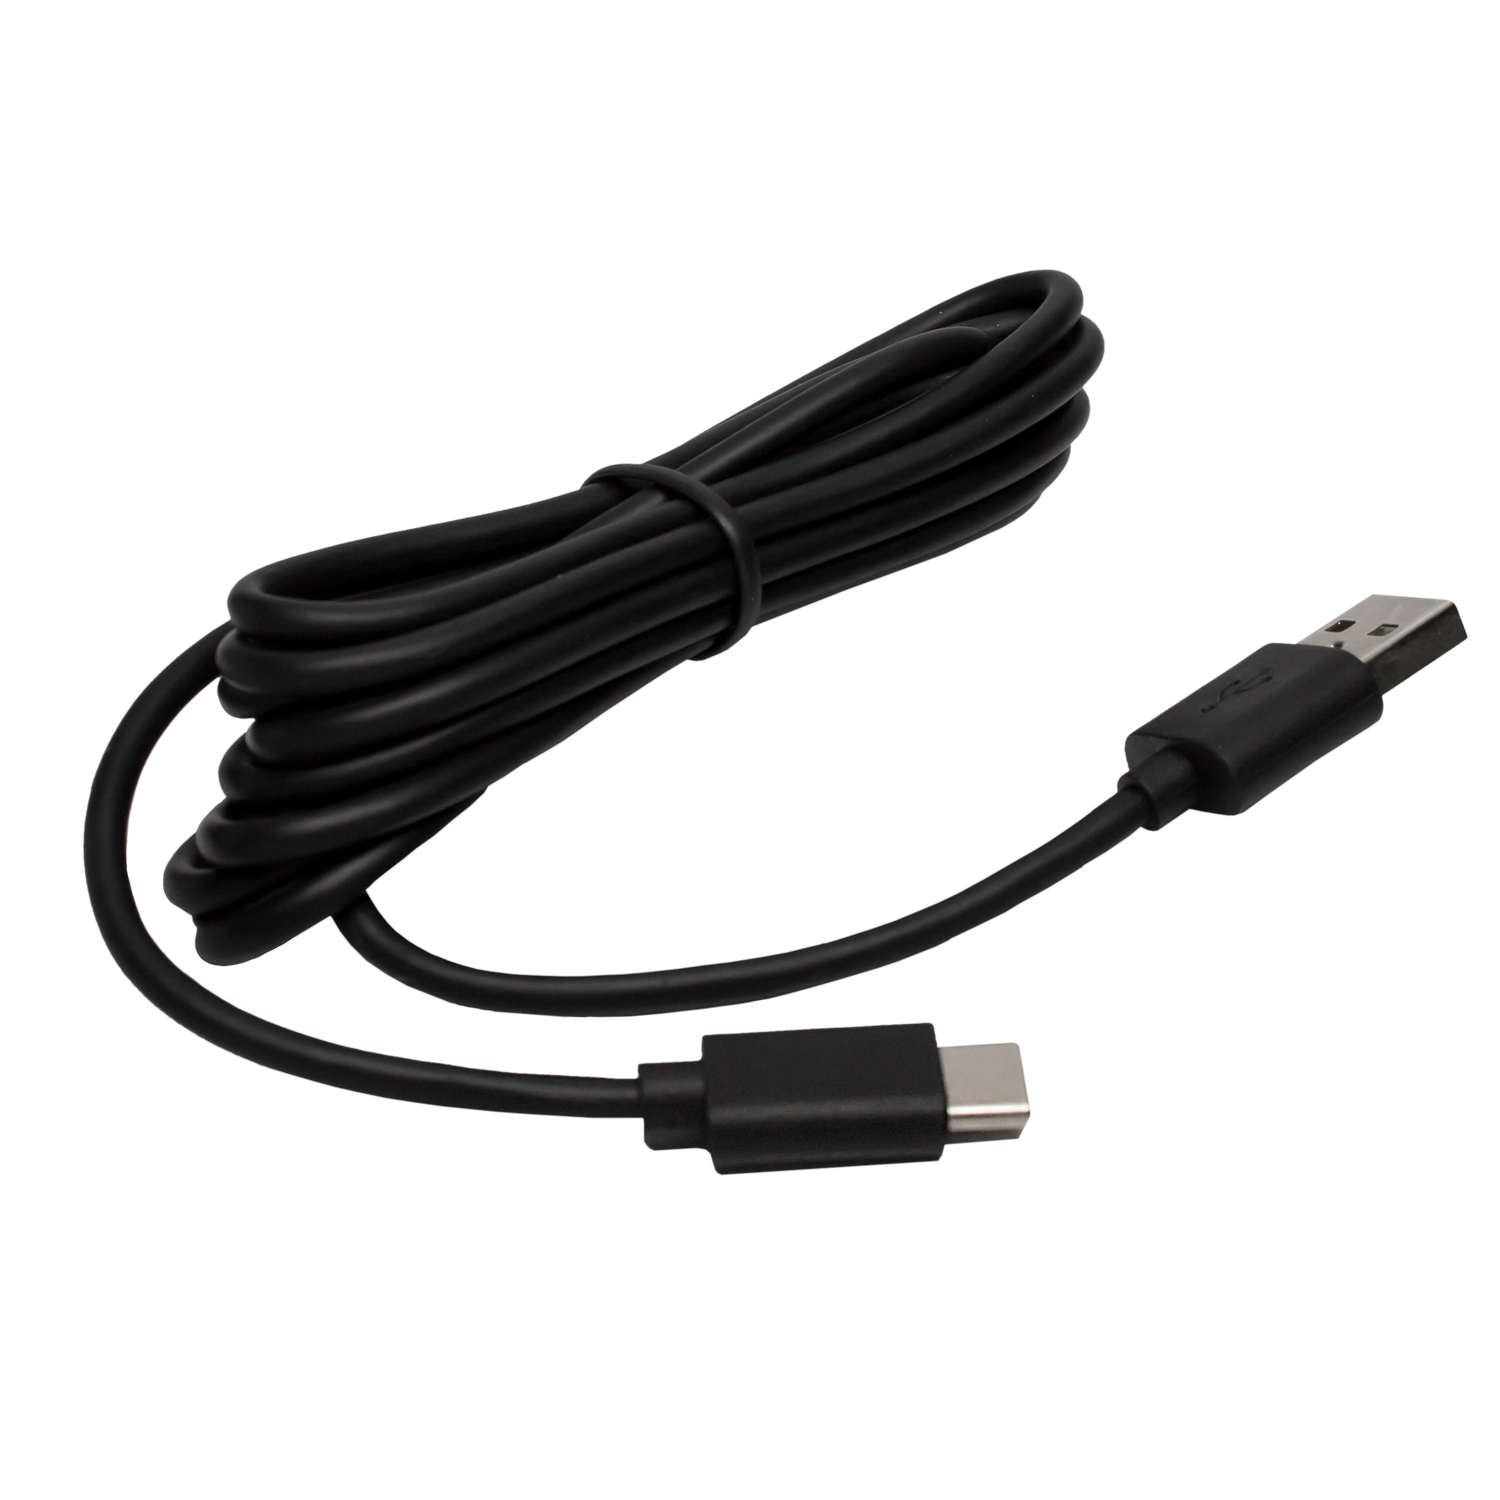 Sonim USB-C Data & Charge Cable for Sonim Handsets. 